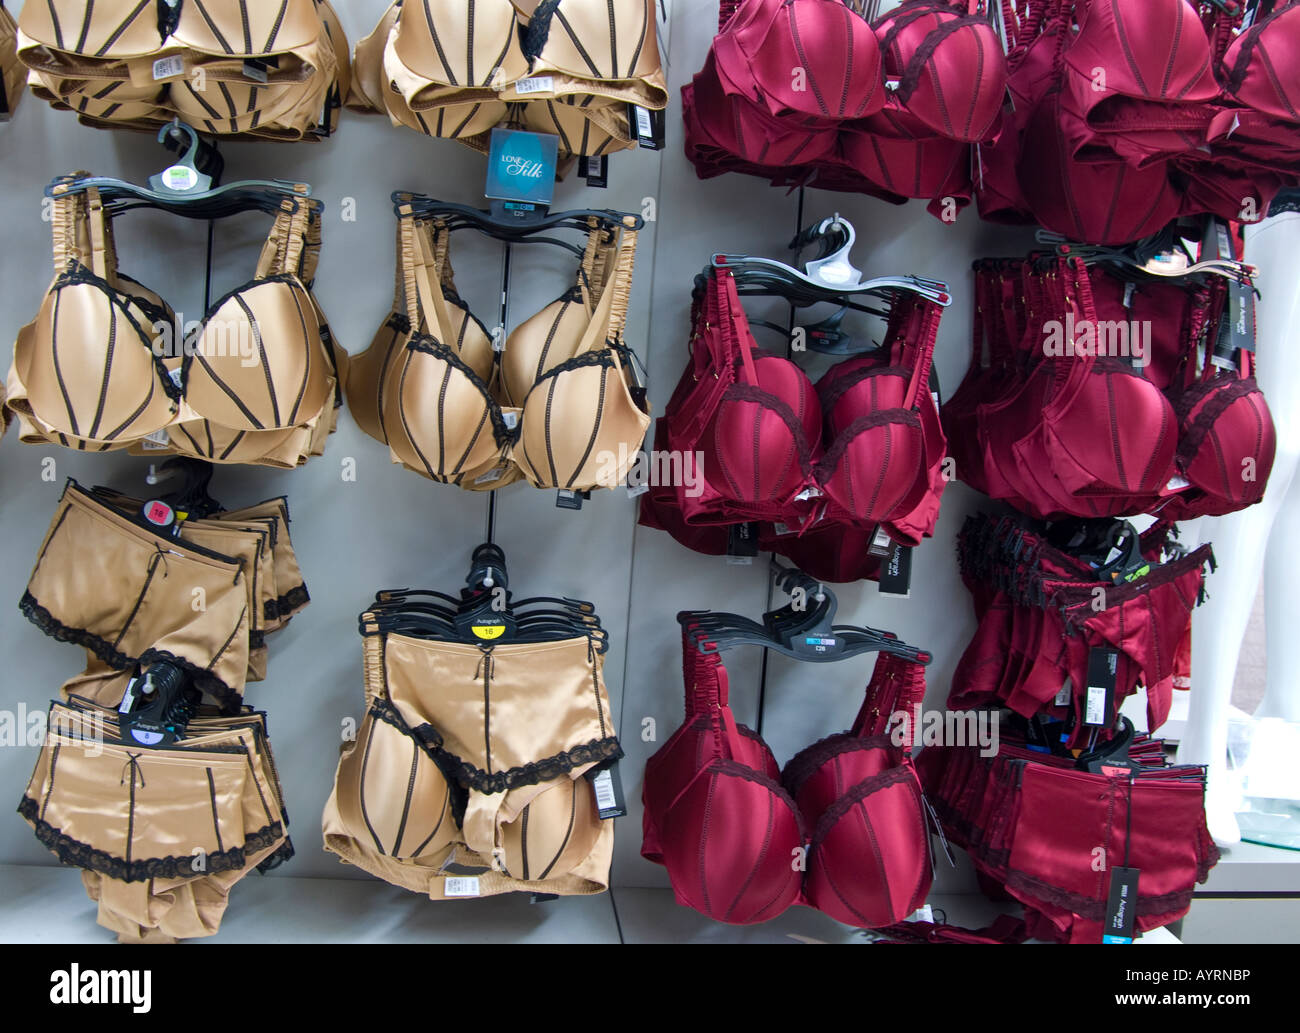 A display of bra's in a clothes shop Stock Photo - Alamy